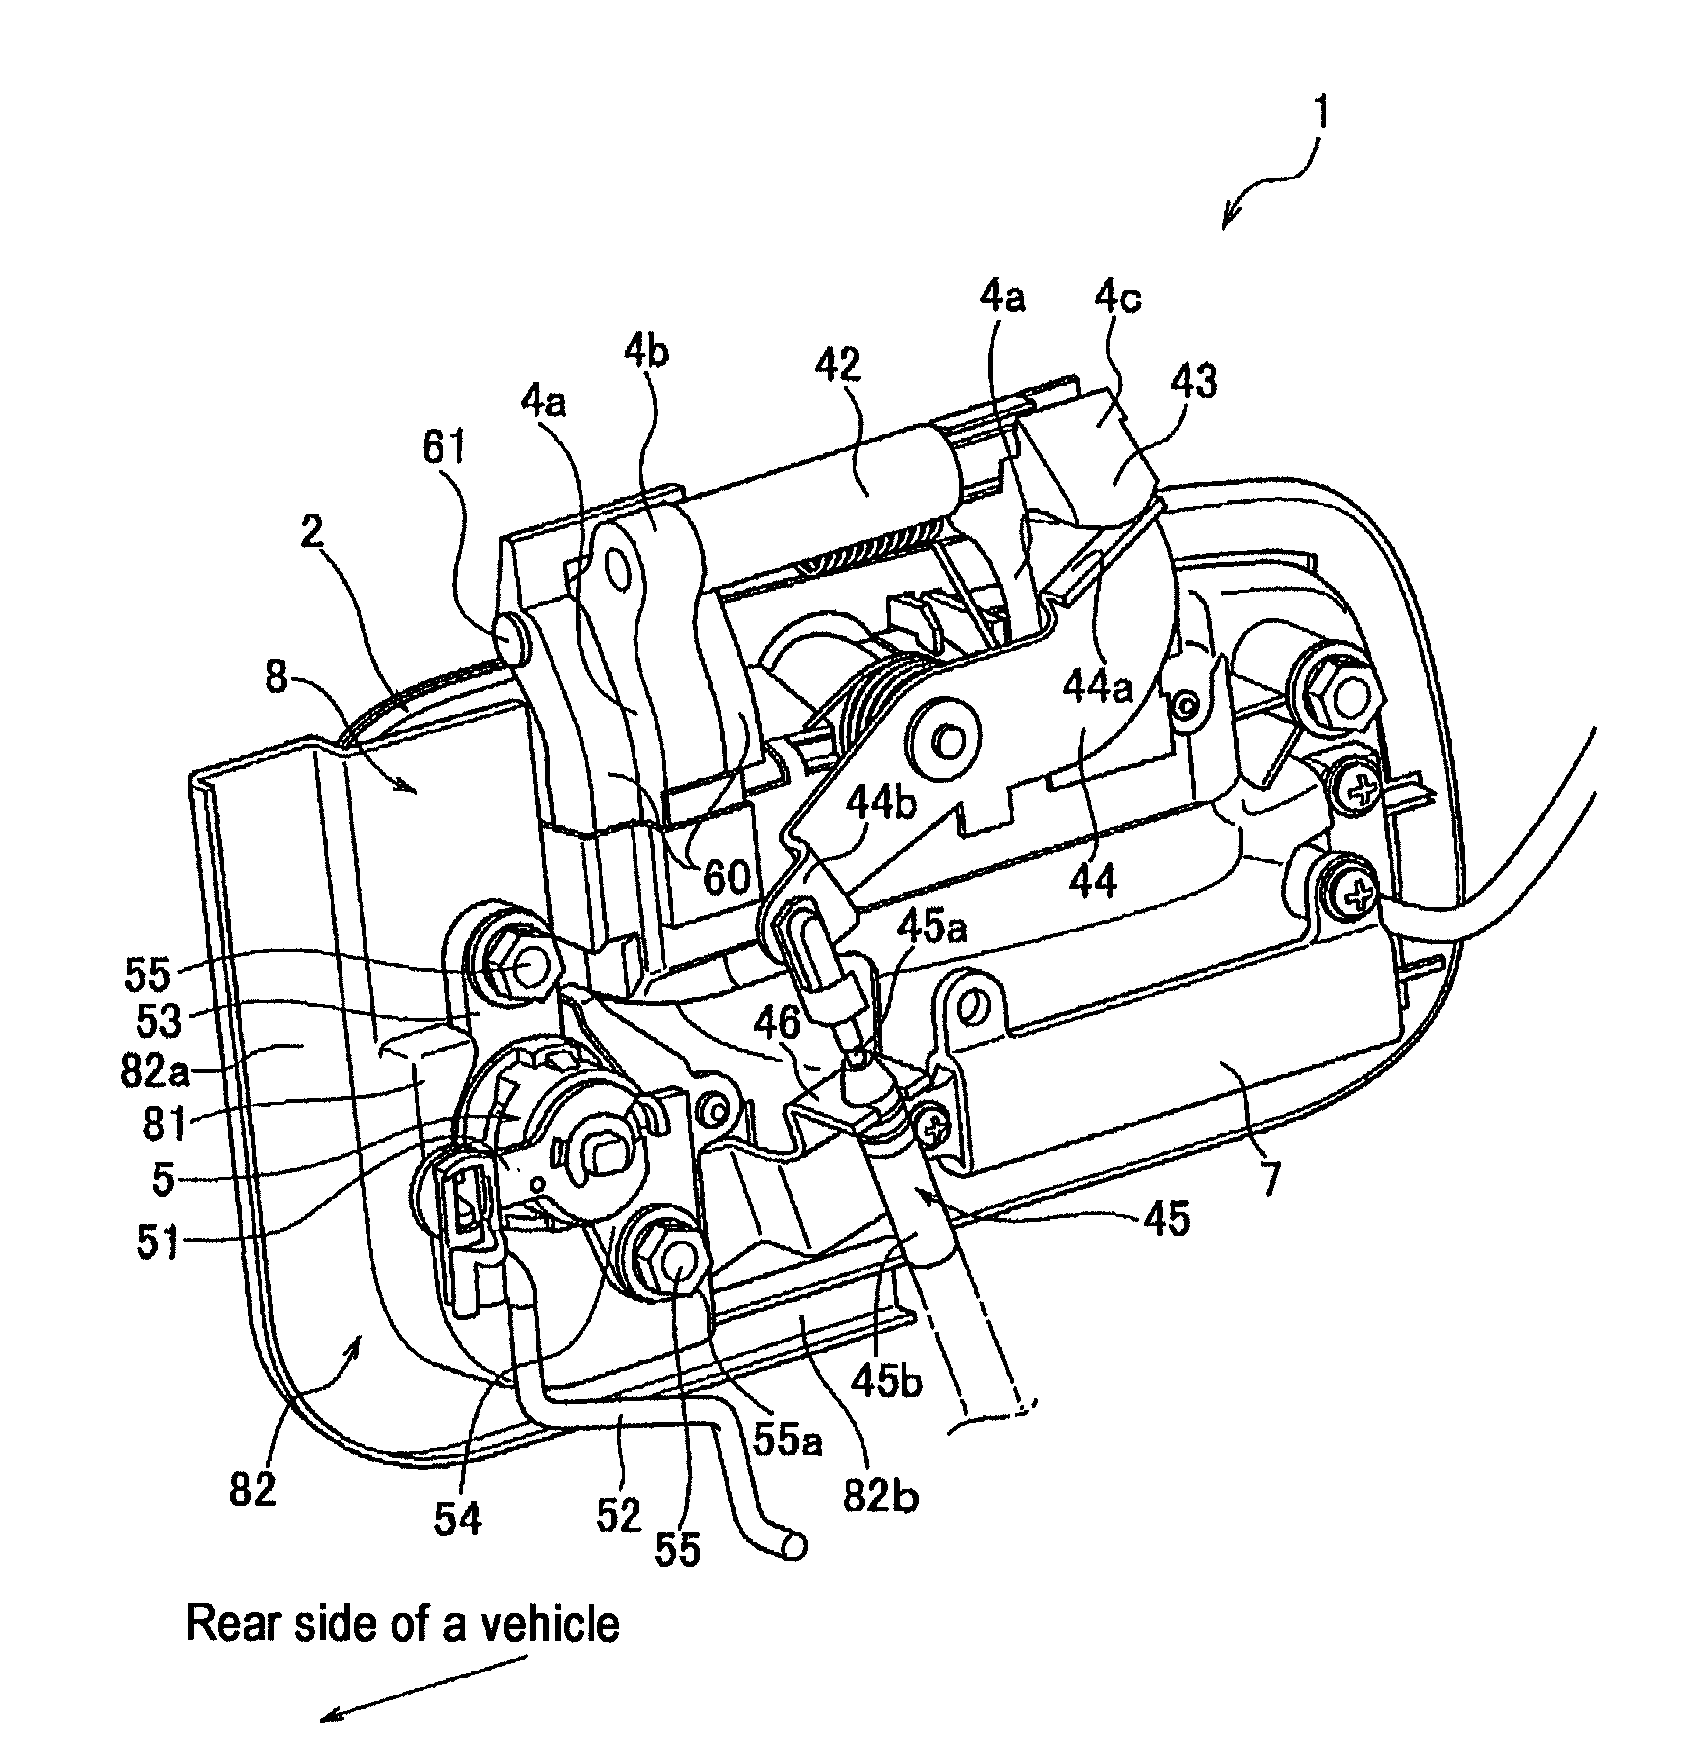 Structure for outside door handle of vehicles